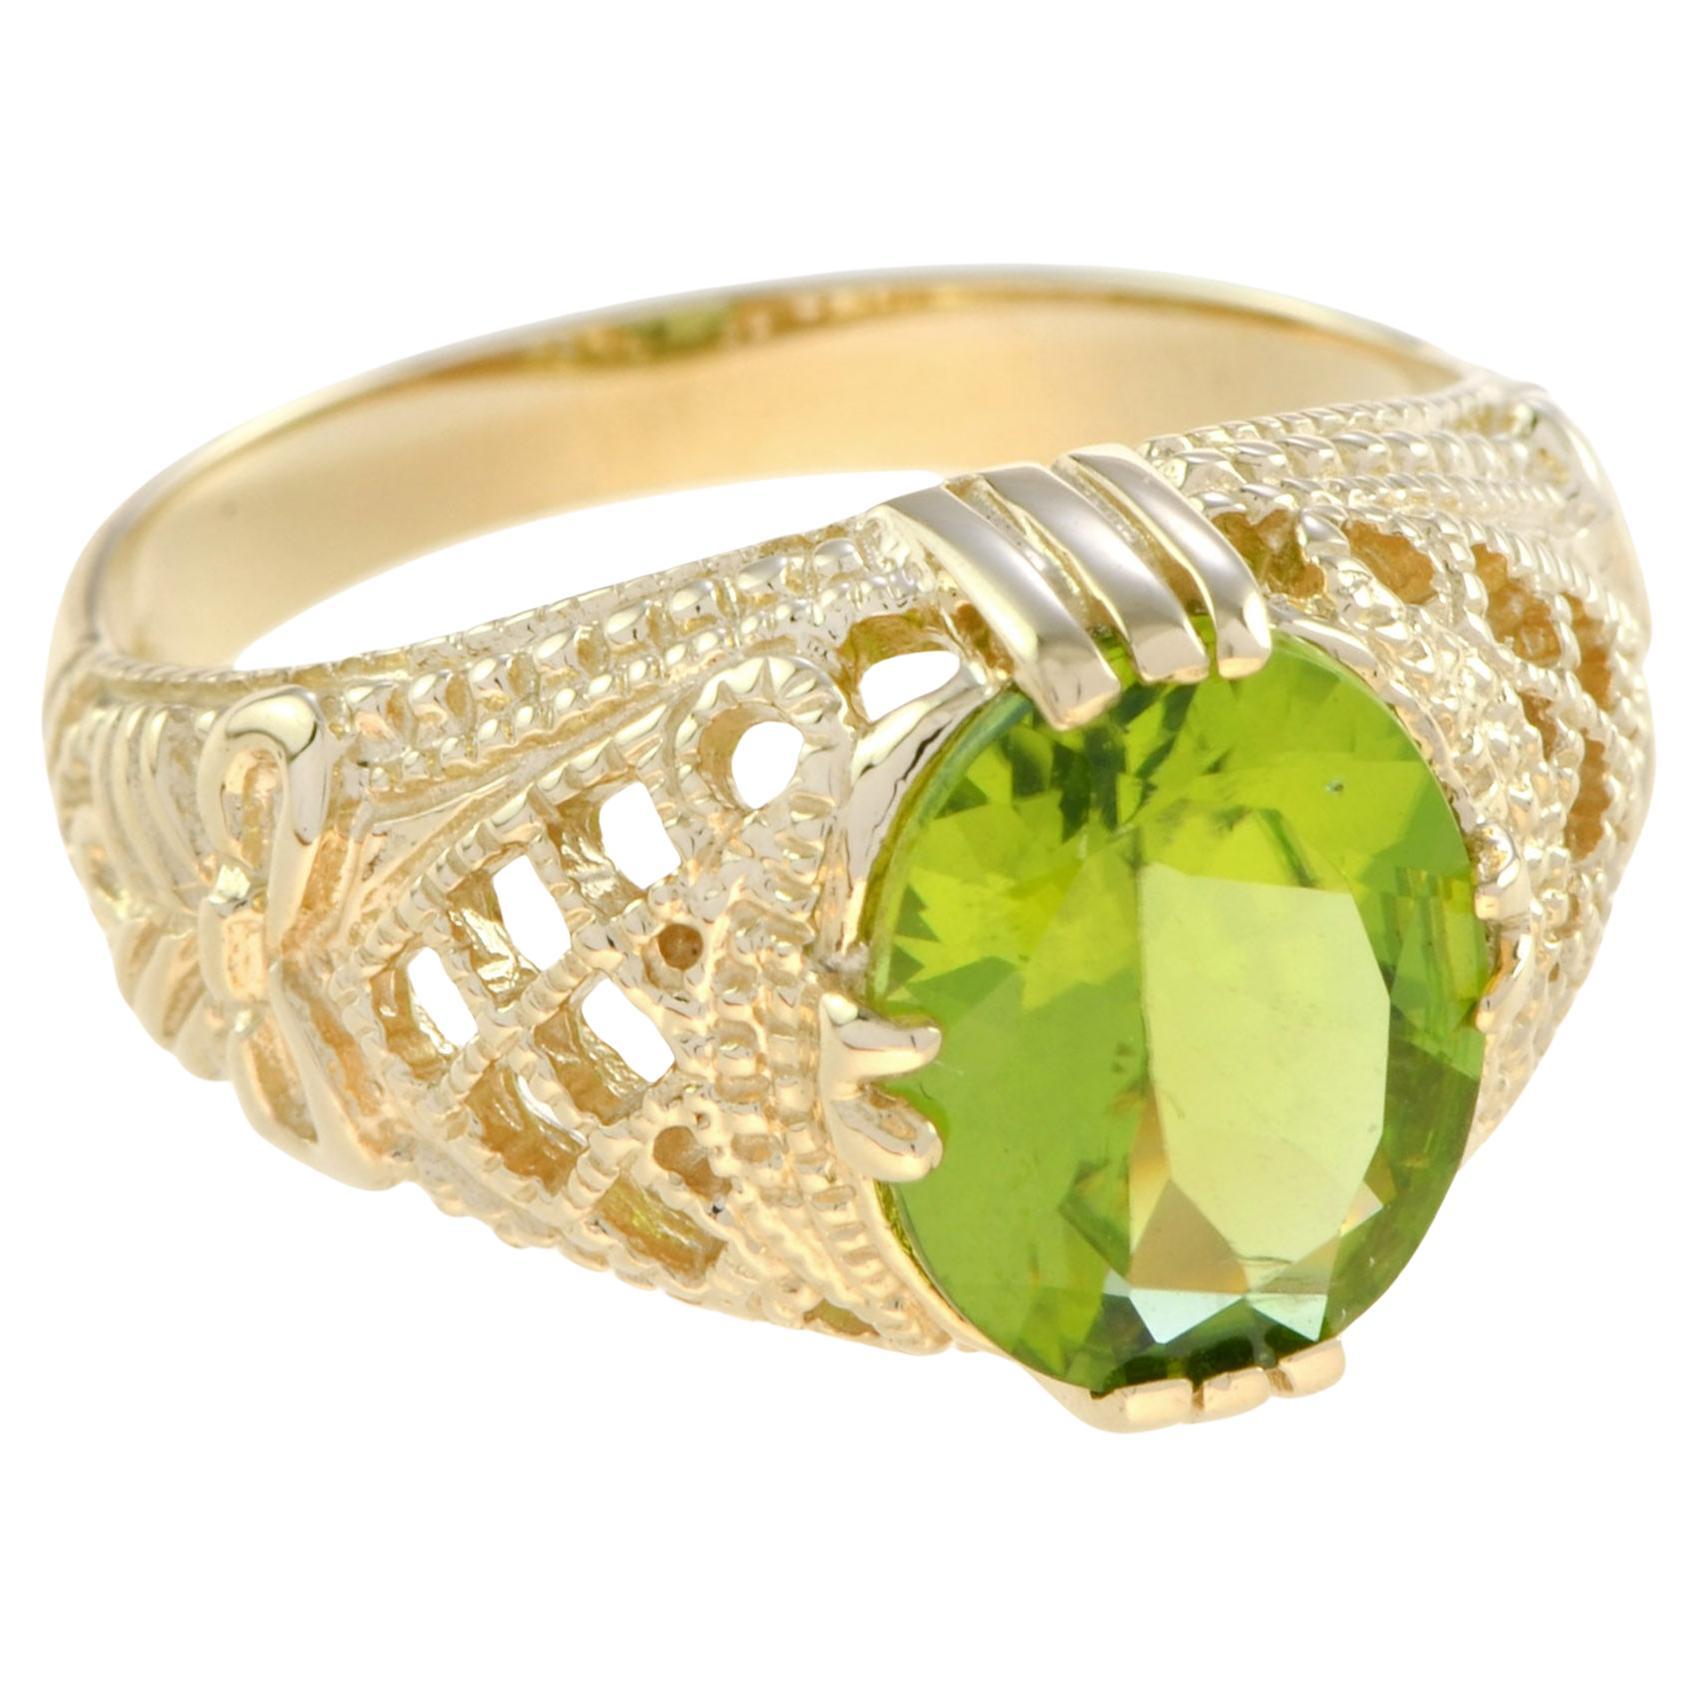 For Sale:  Natural Peridot Vintage Style Filigree Cocktail Ring in 9K Yellow Gold